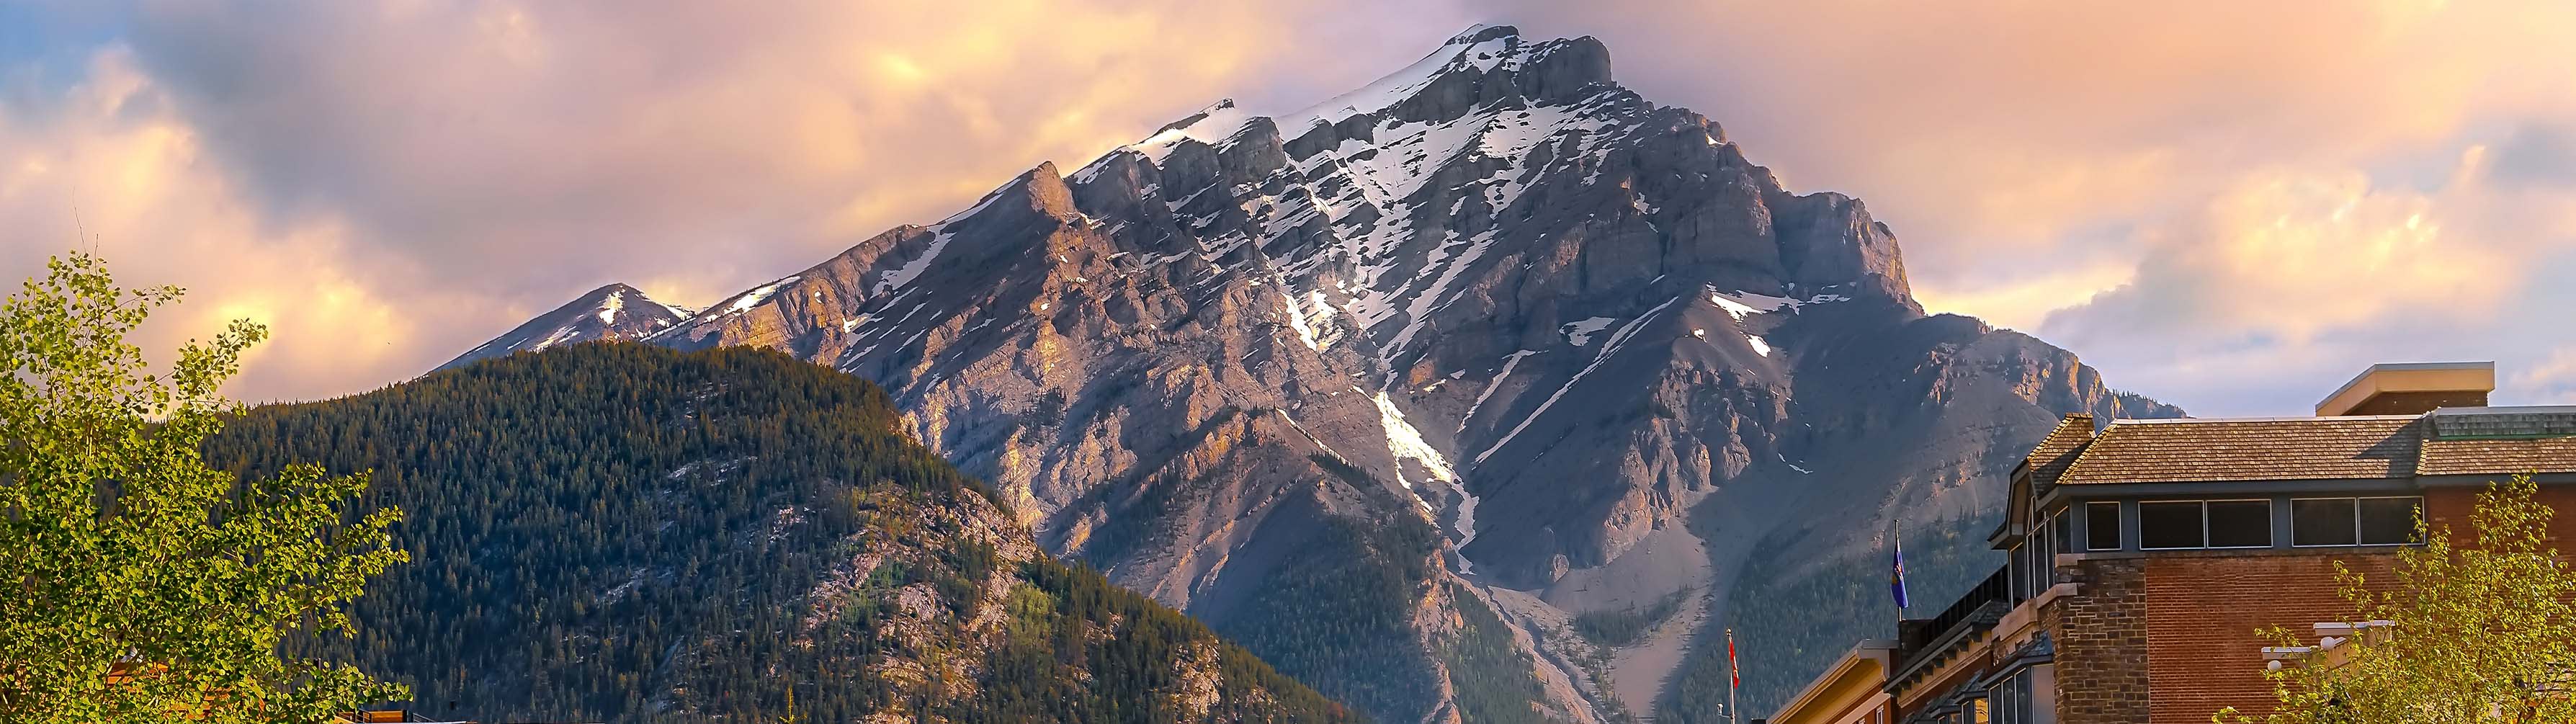 A rugged mountain peak stands against an orange sky in Banff.